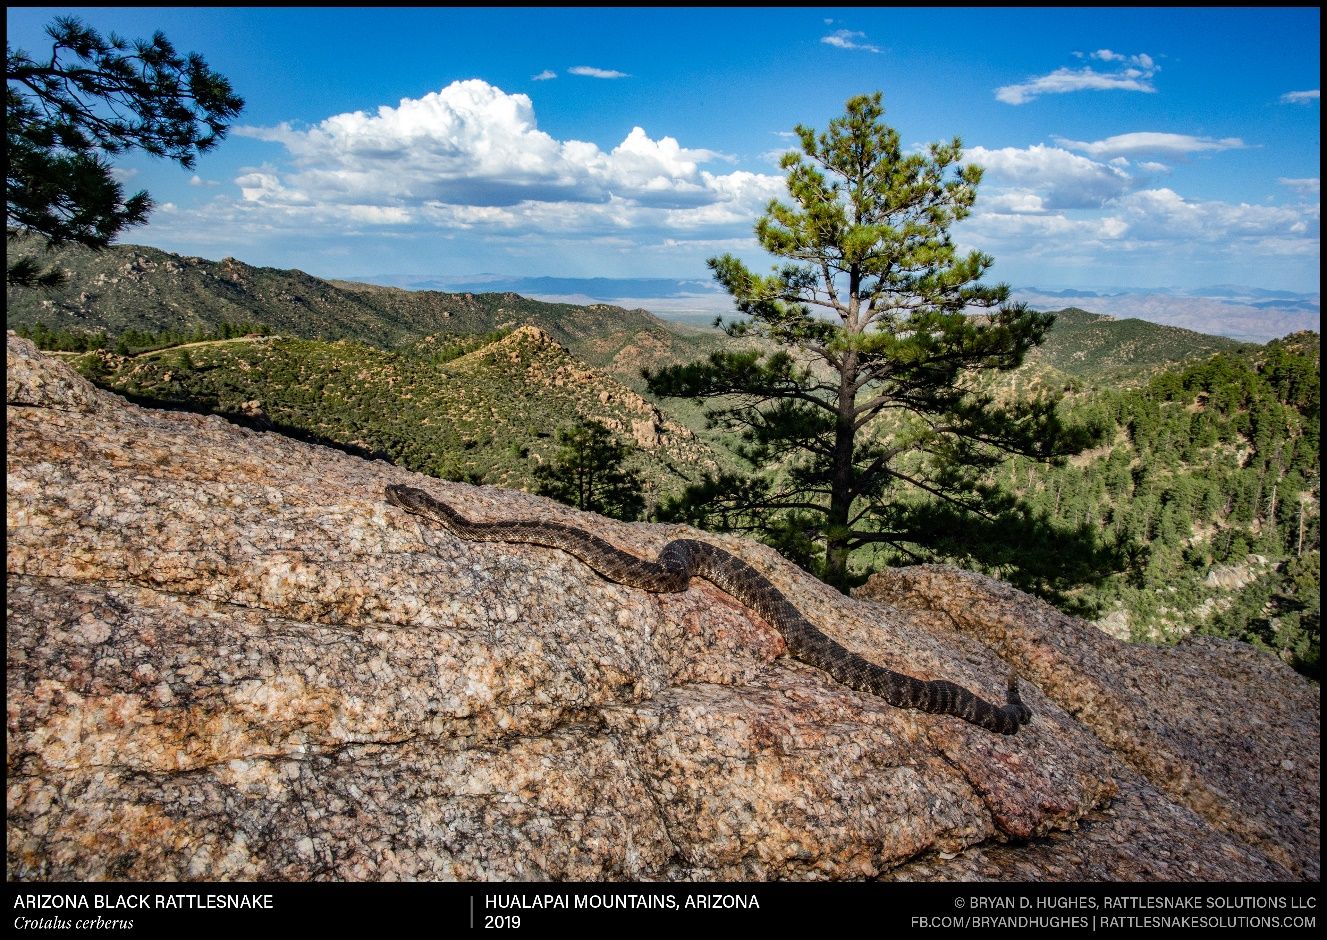 The Arizona black rattlesnake is at home in high-elevation montane areas.